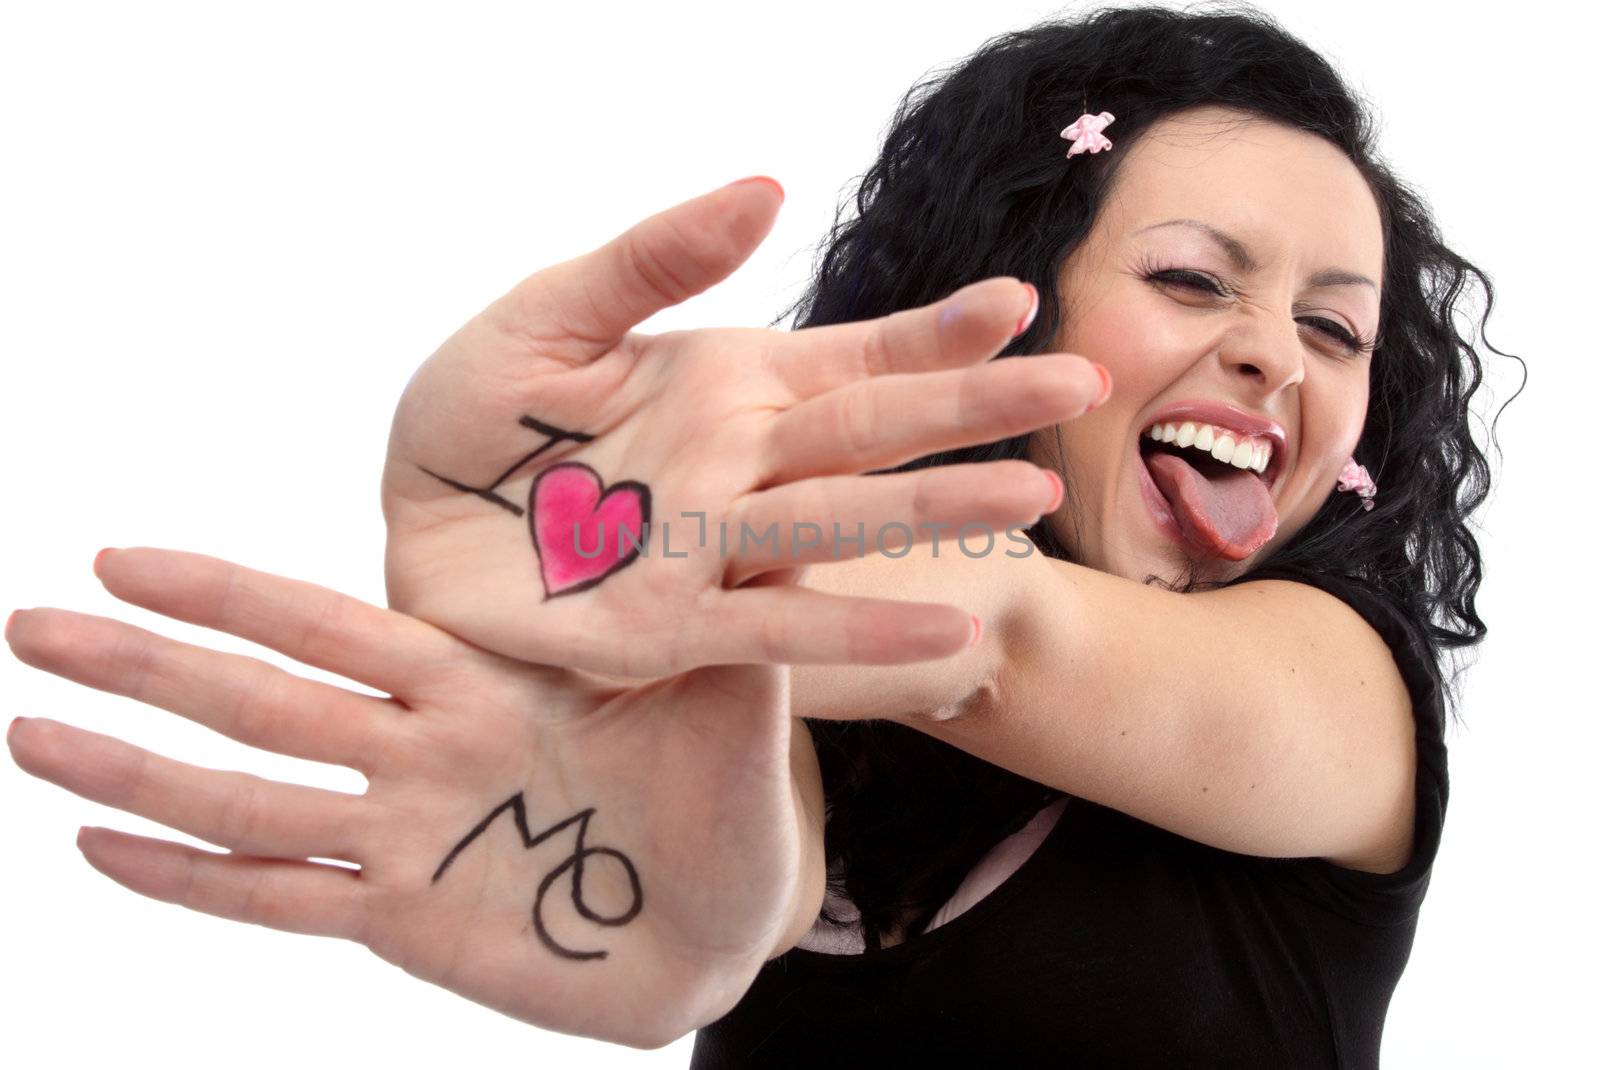 Beautiful lady with a sign on her hands "I love me"